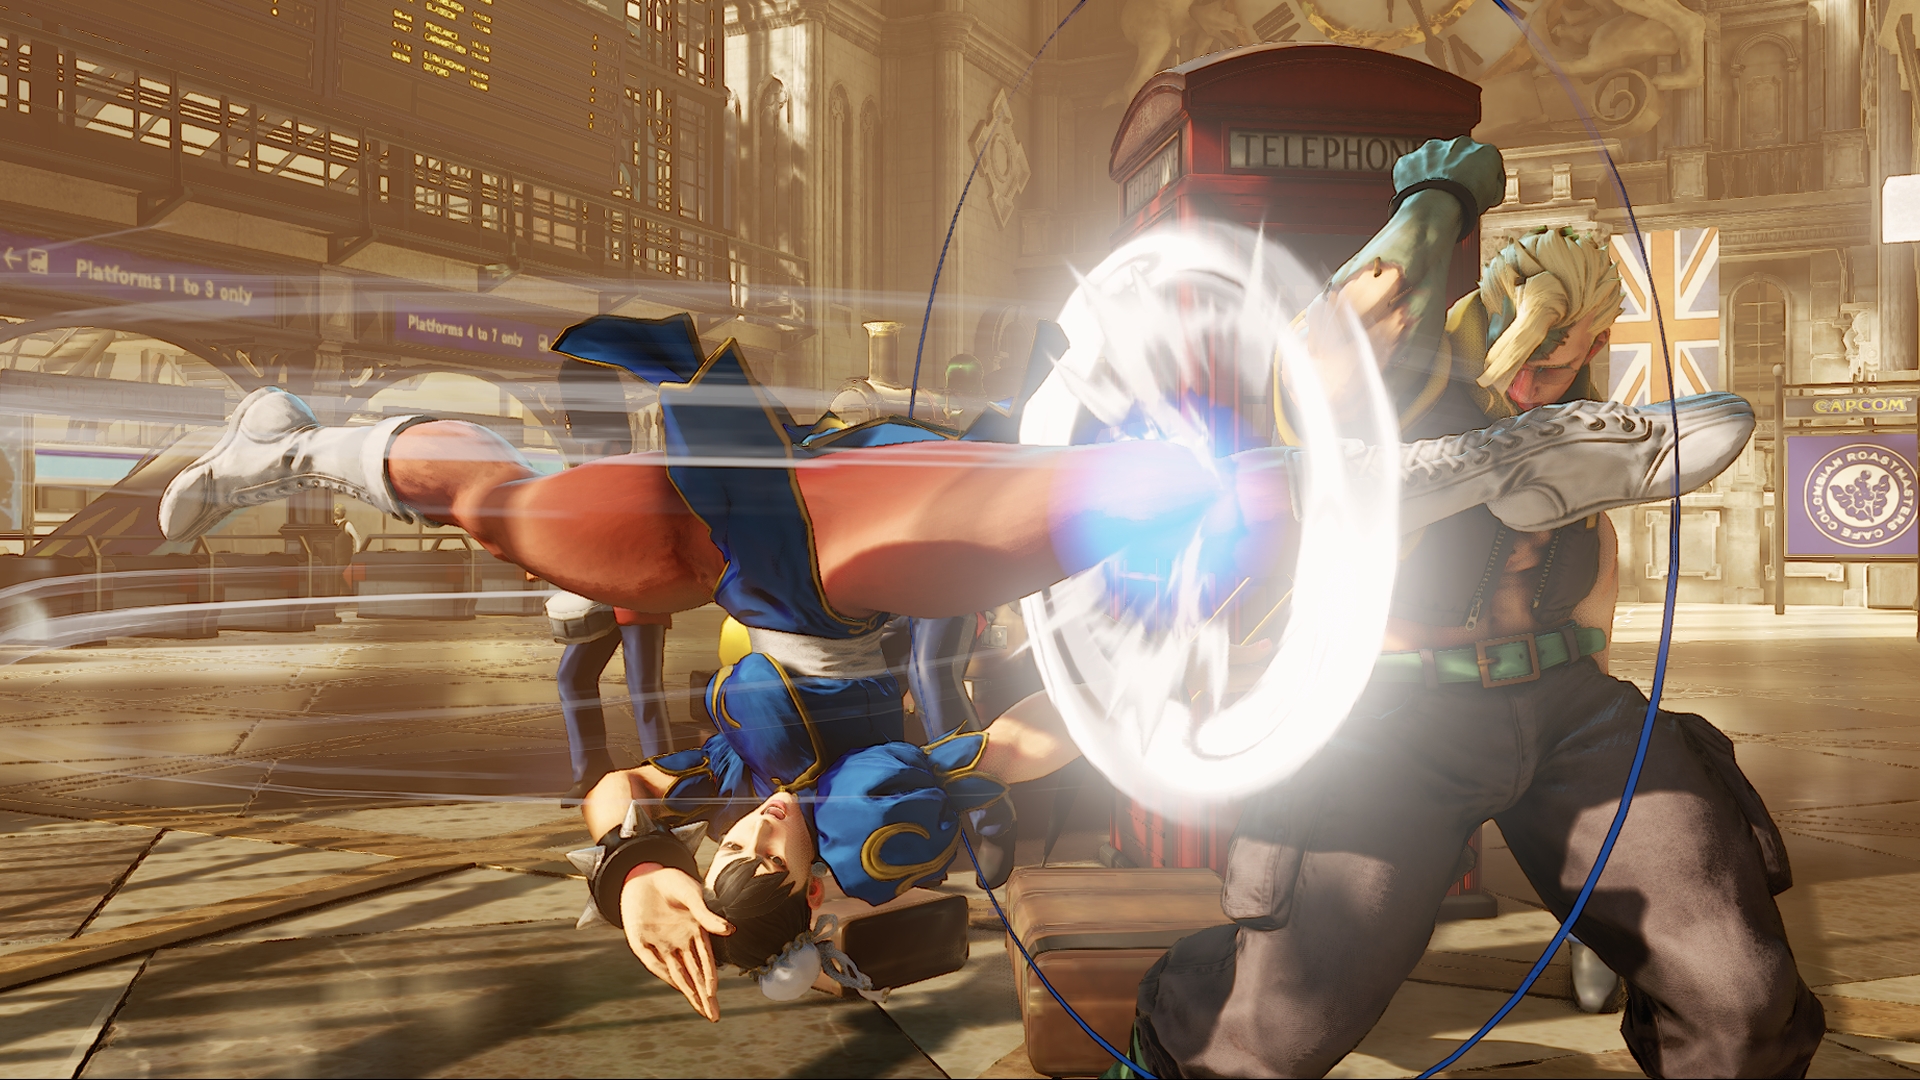 Street Fighter 5 adds Birdie, Cammy and a beta - Polygon